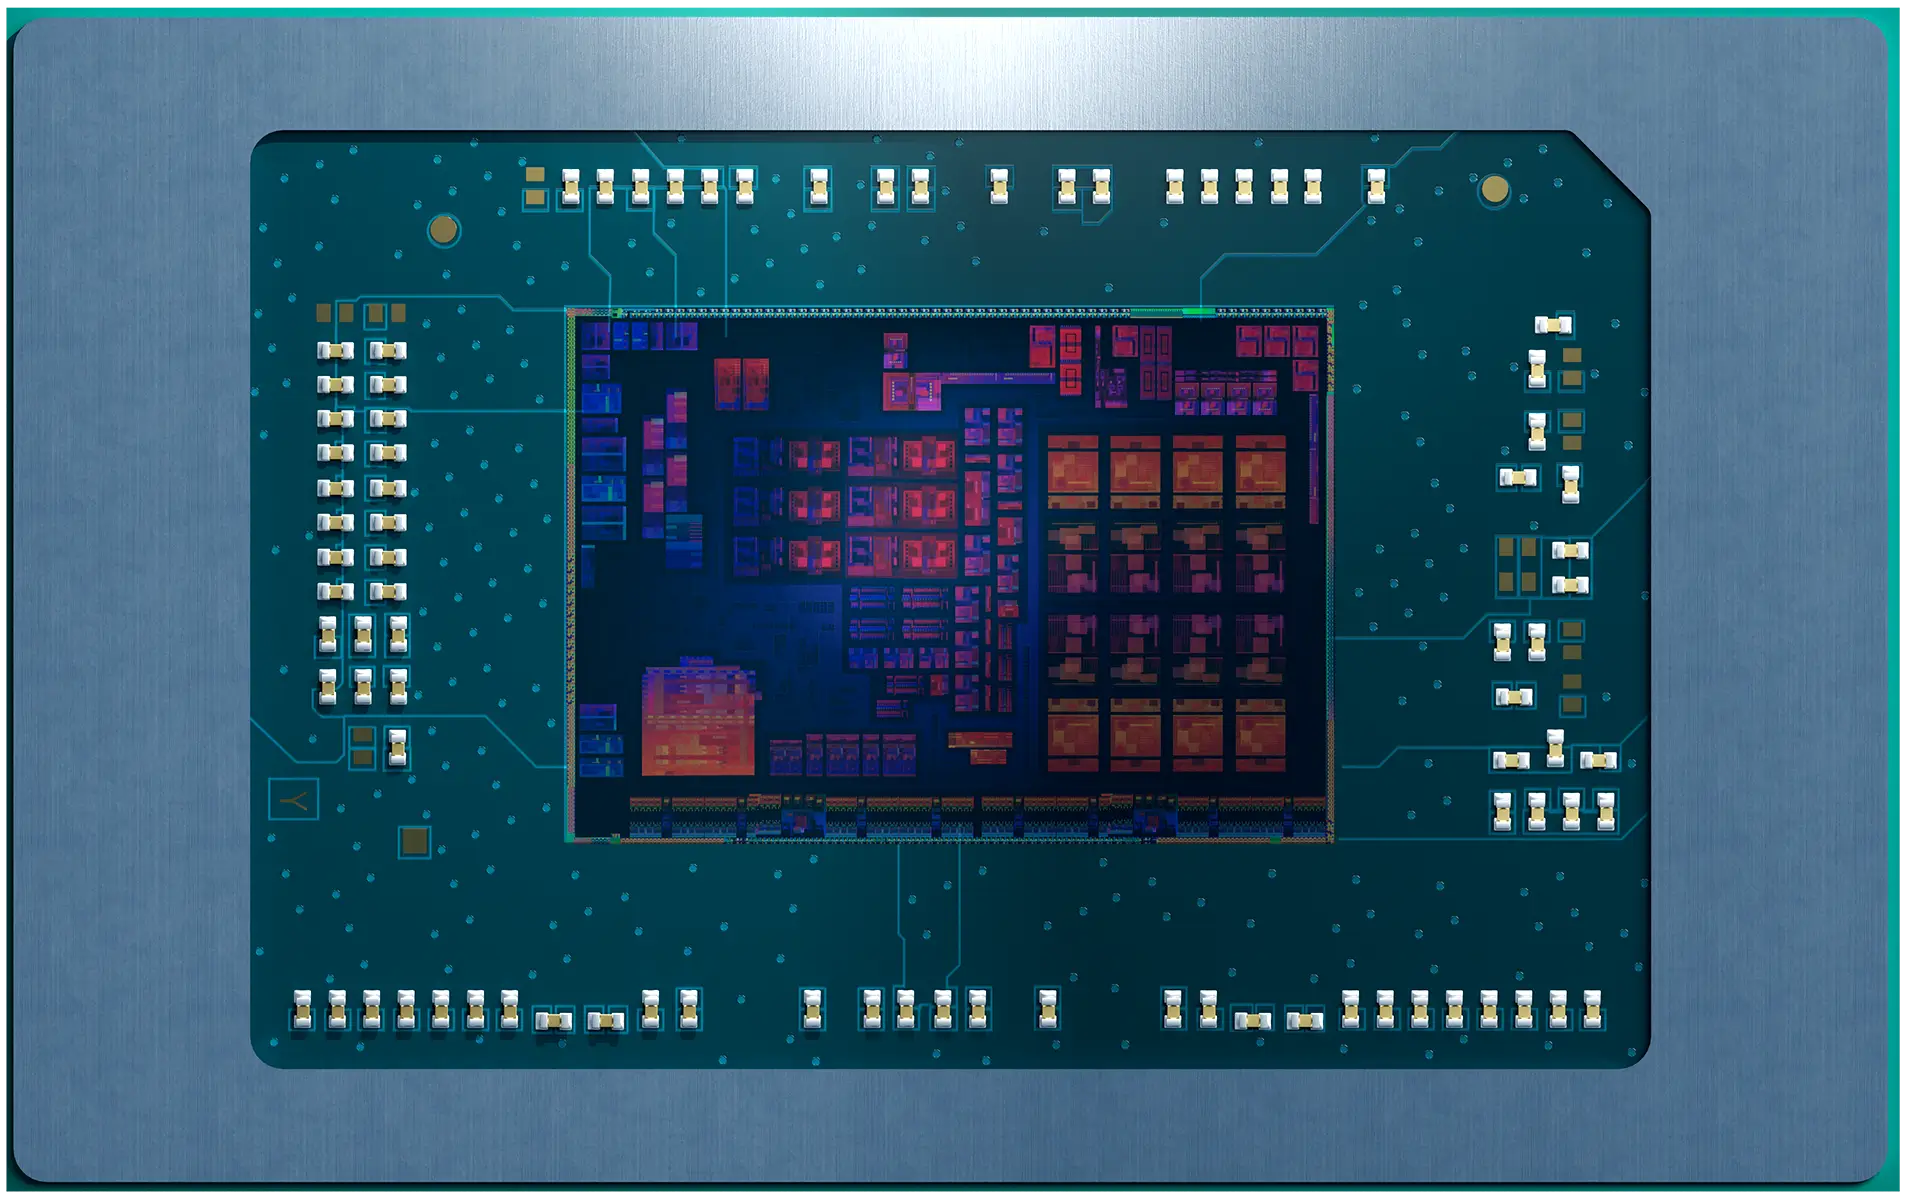 AMD Zen 5 Strix Point with 12 cores, Kraken with 8 cores and more details